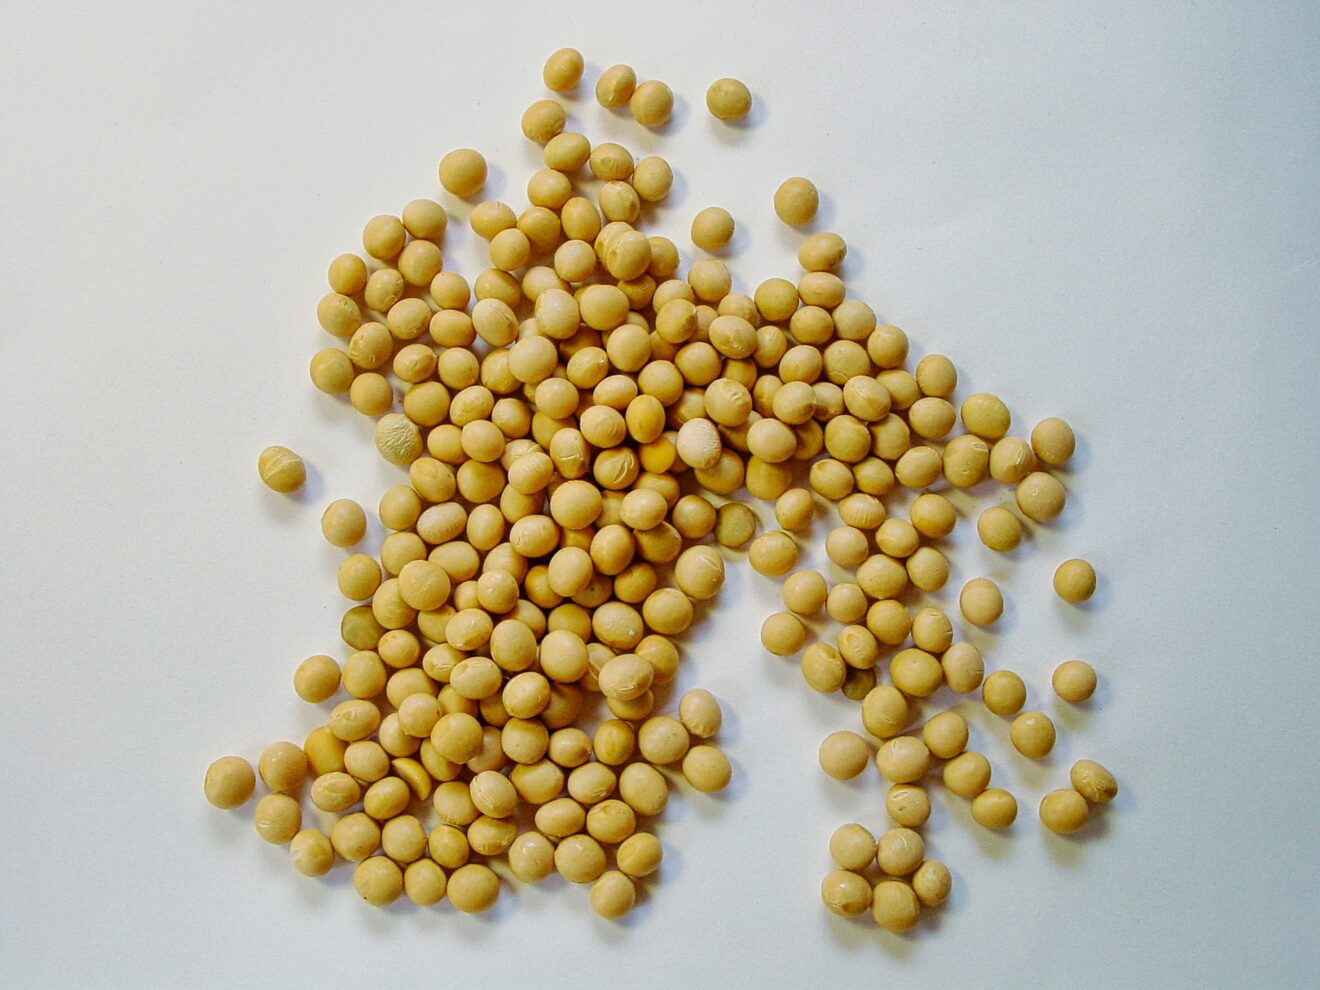 A handful of soybeans